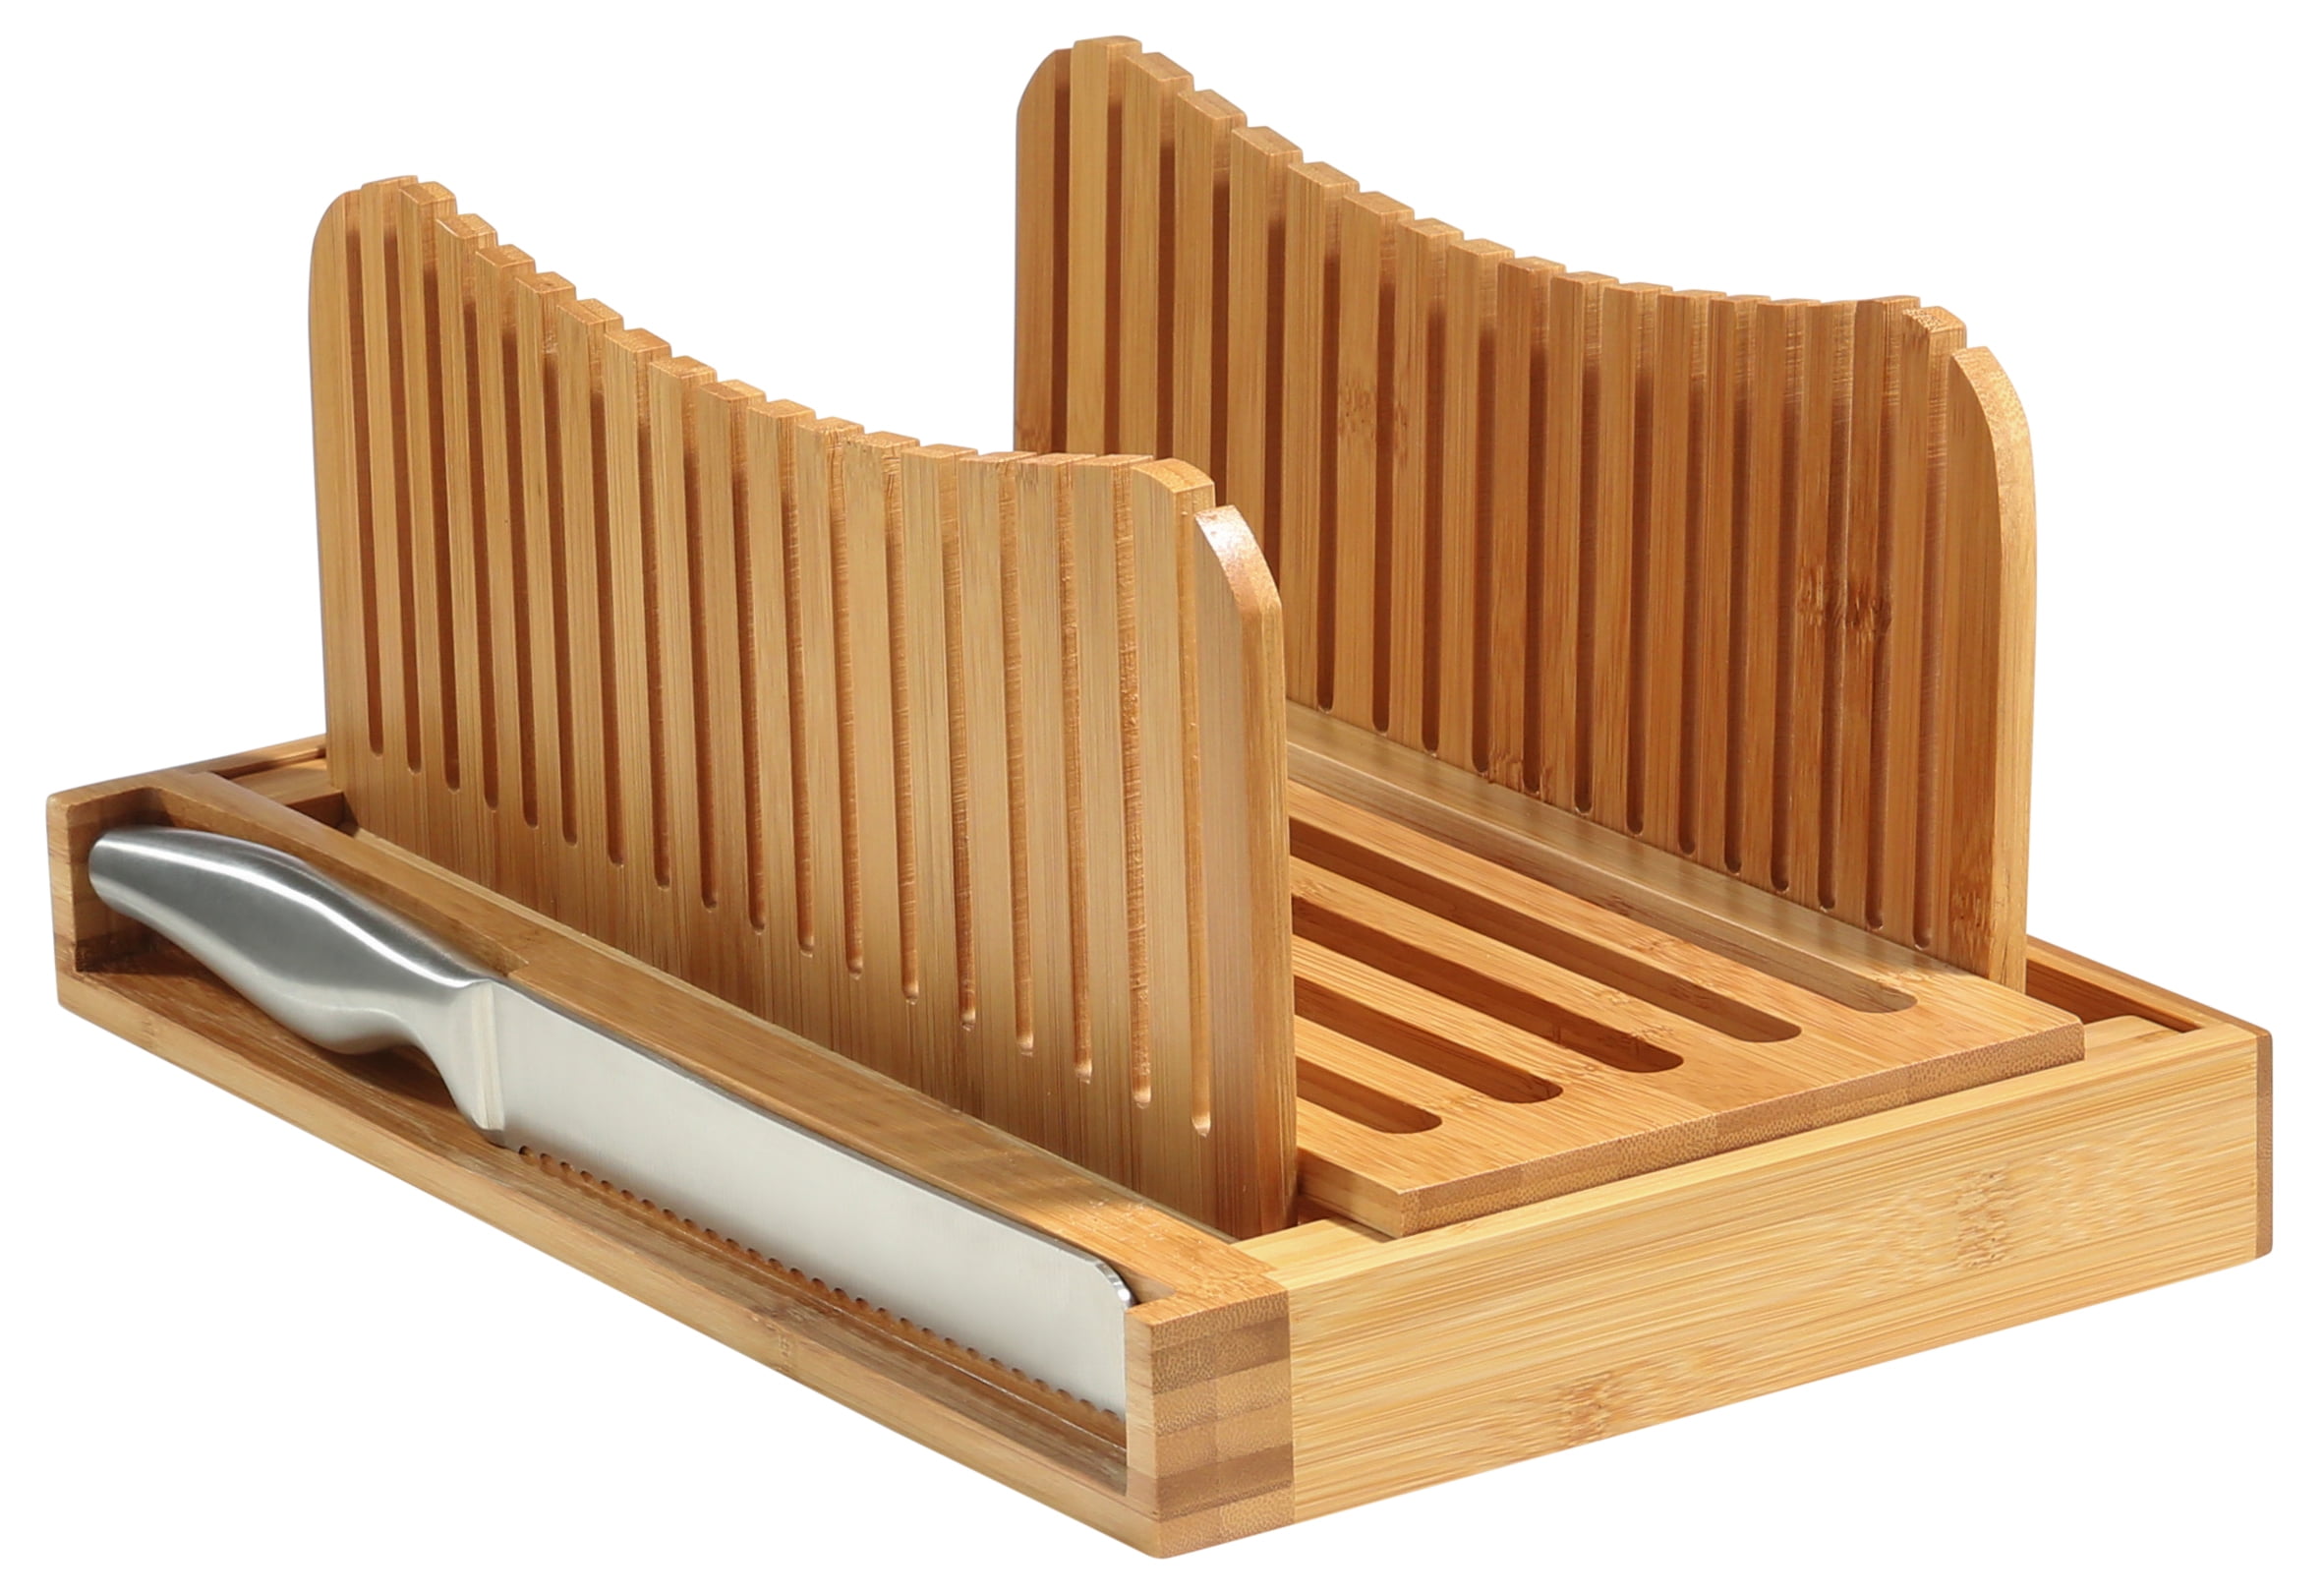 Brand New Open Box Breadman Wood Collapsible Homemade Bread Slicer